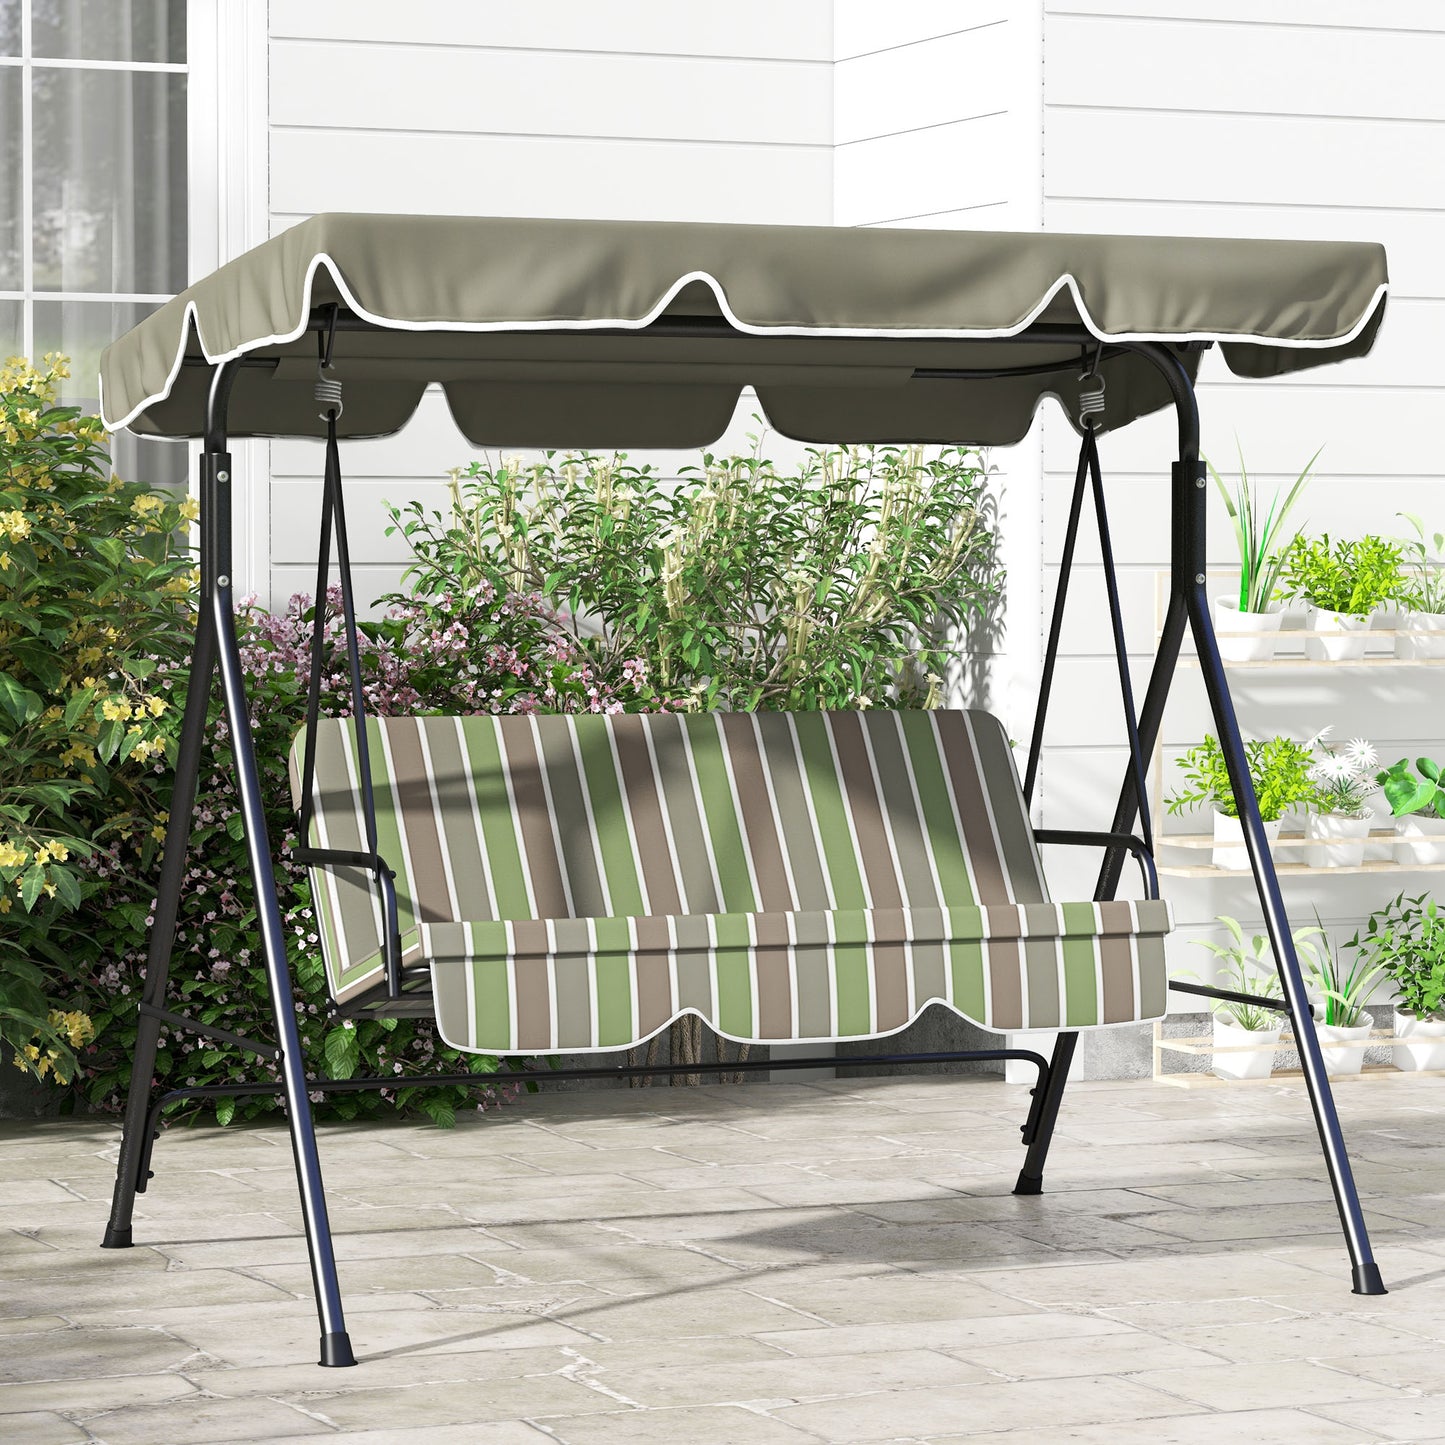 3-Seater Outdoor Porch Swing with Adjustable Canopy, Patio Swing Chair for Garden, Poolside, Backyard, Green and Brown at Gallery Canada